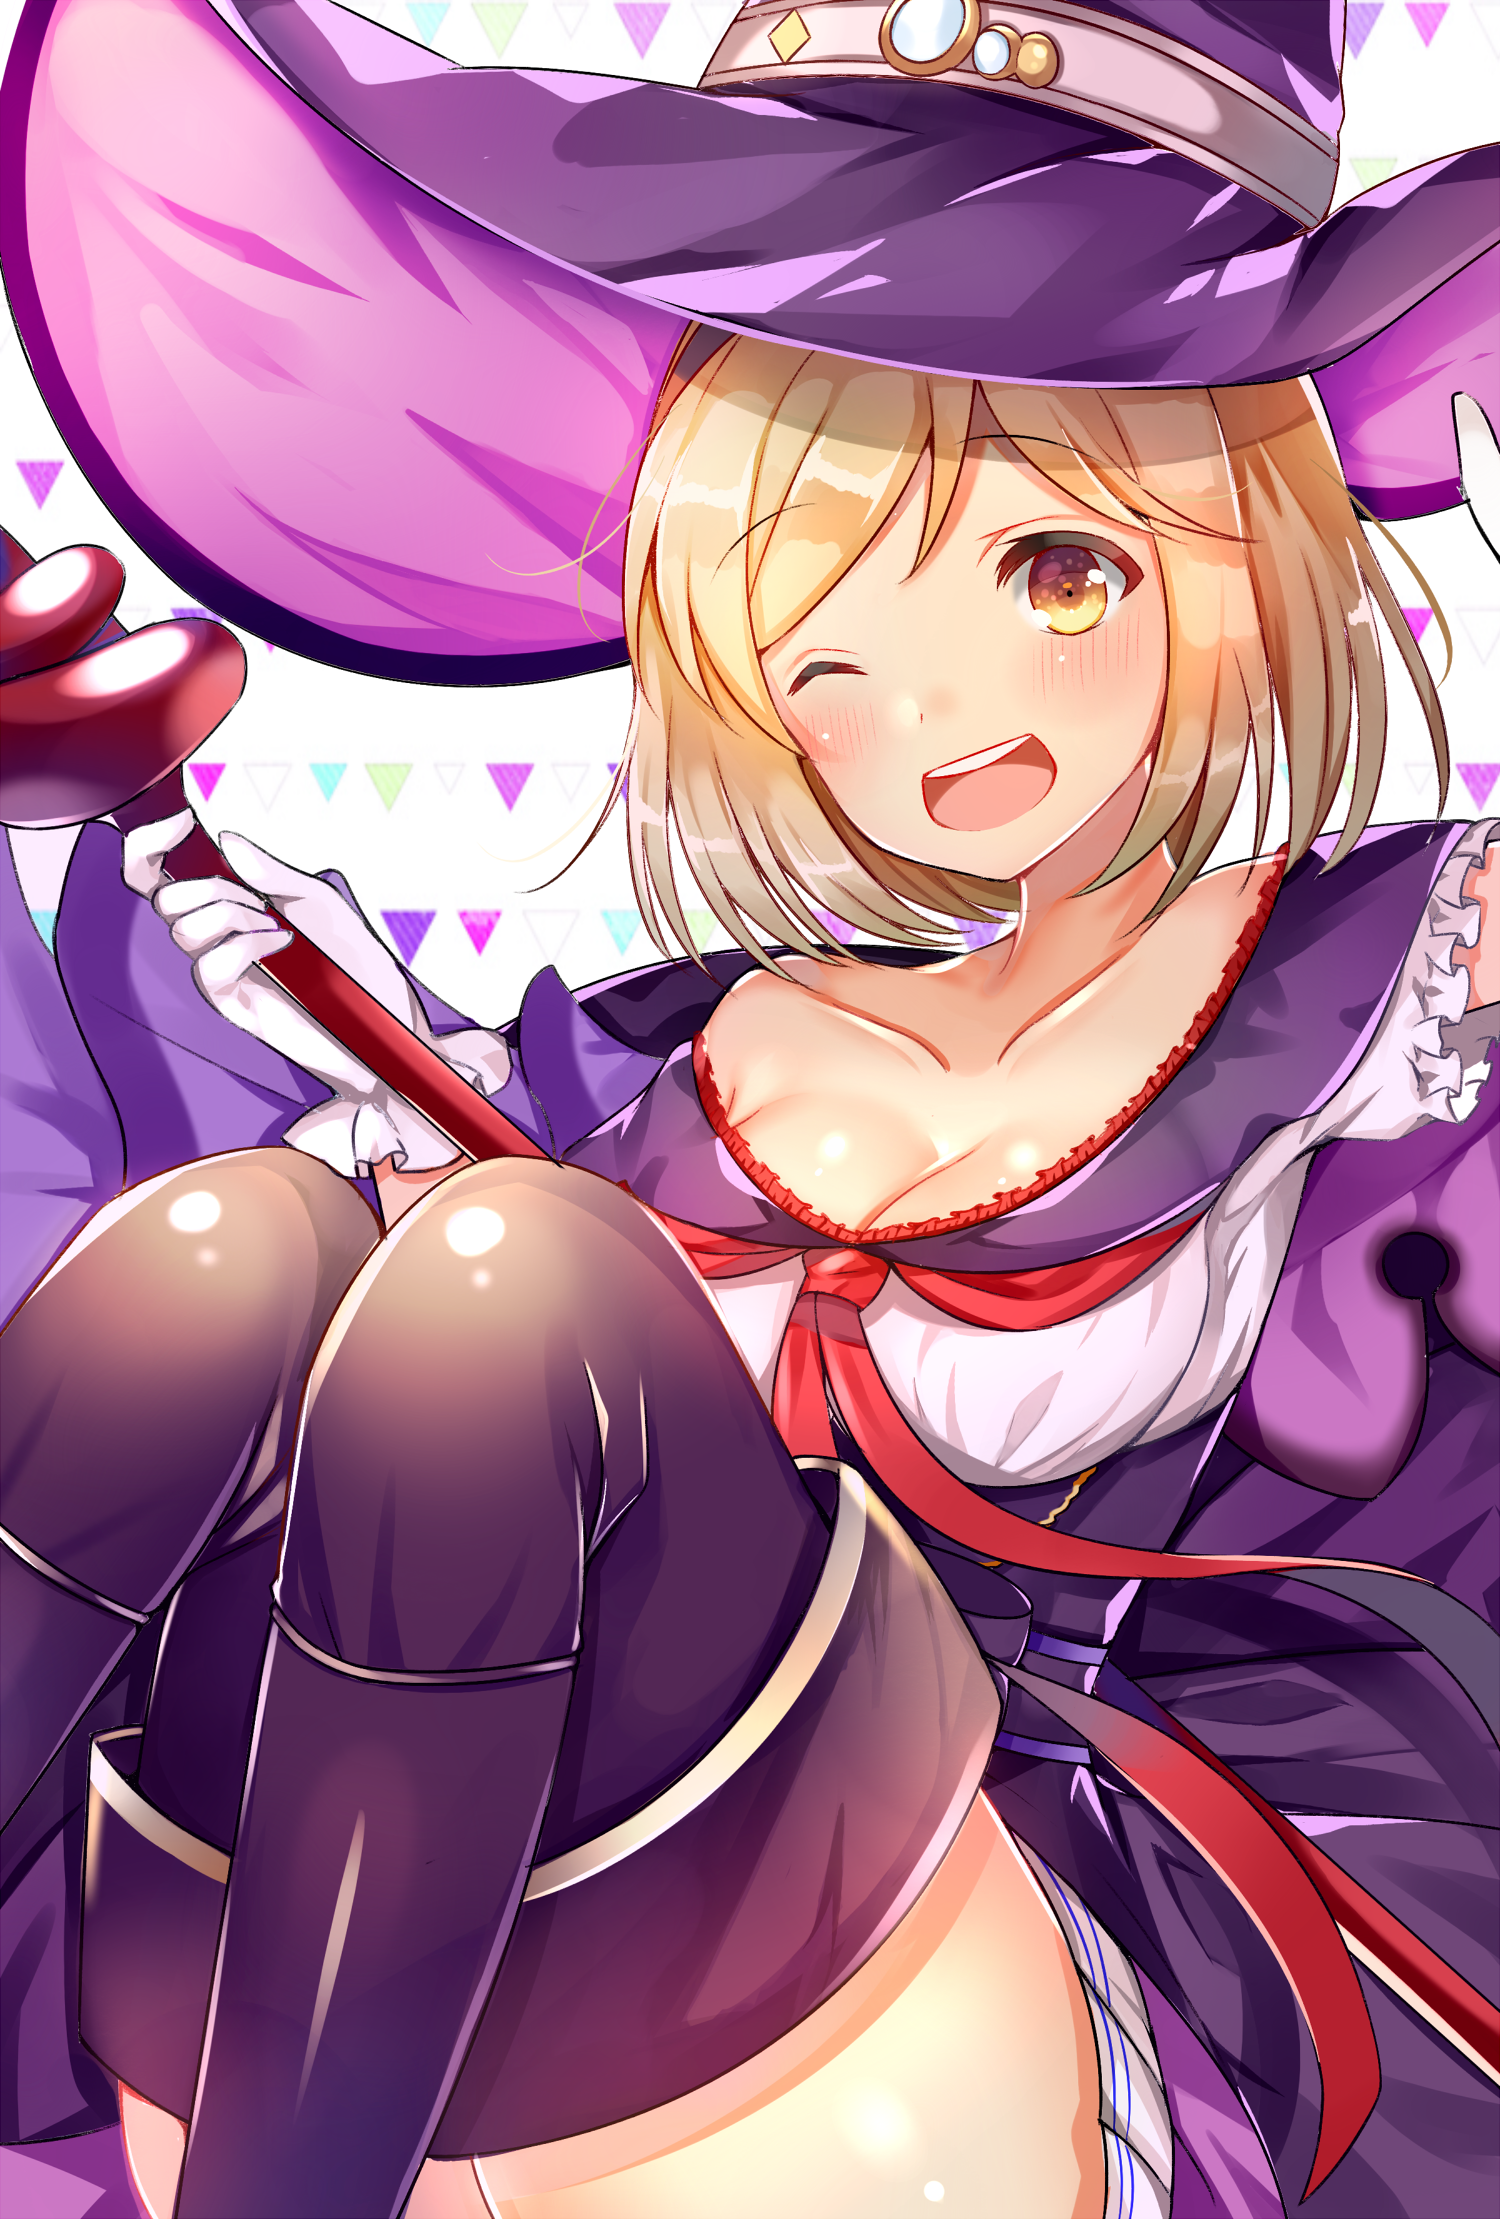 Anime 1500x2219 anime anime girls blonde orange eyes hat open shirt Granblue Fantasy Pixiv knees witch hat one eye closed fantasy art fantasy girl yellow eyes shoulder length hair women with hats open mouth